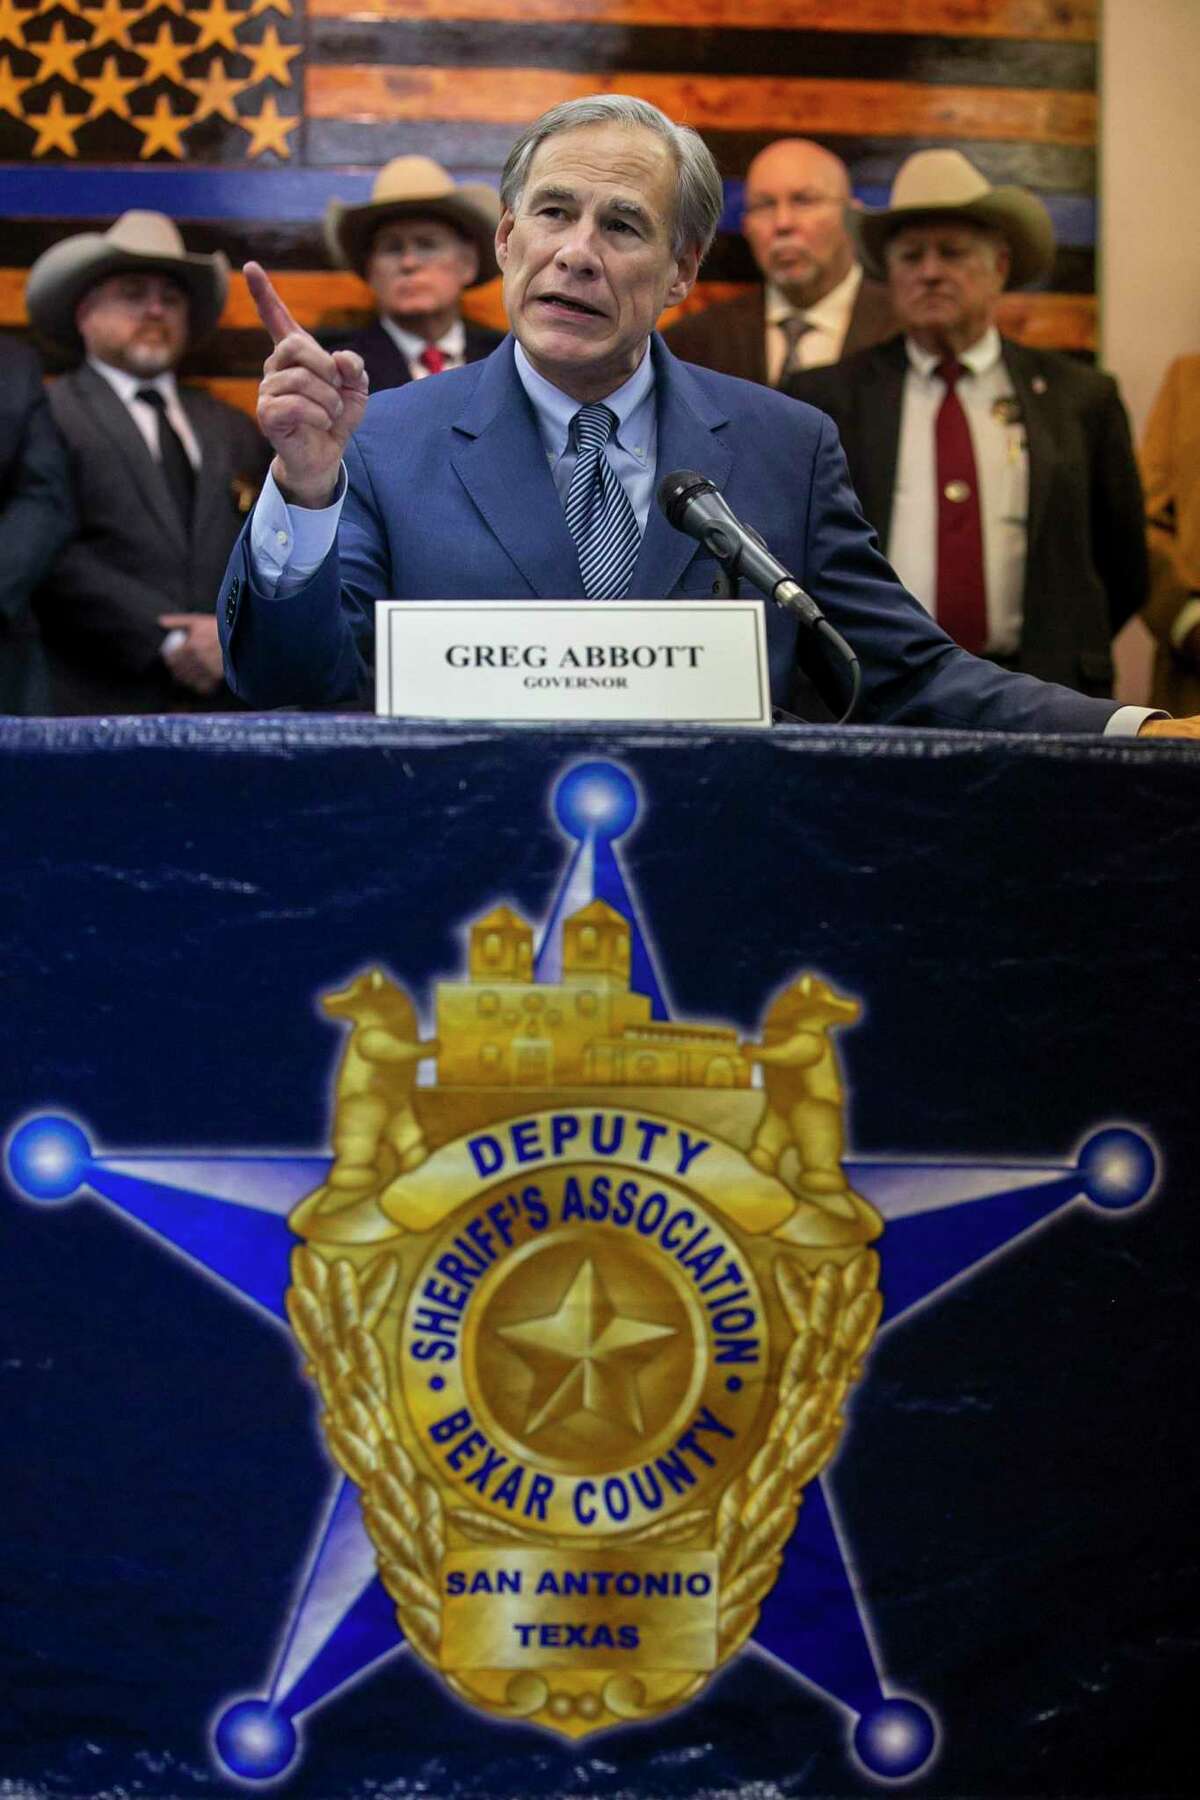 Texas Govenor Greg Abott recently held a campaign event in San Antonio, announcing the endorsement of a number of sheriffs. A reader calls it a photo op.